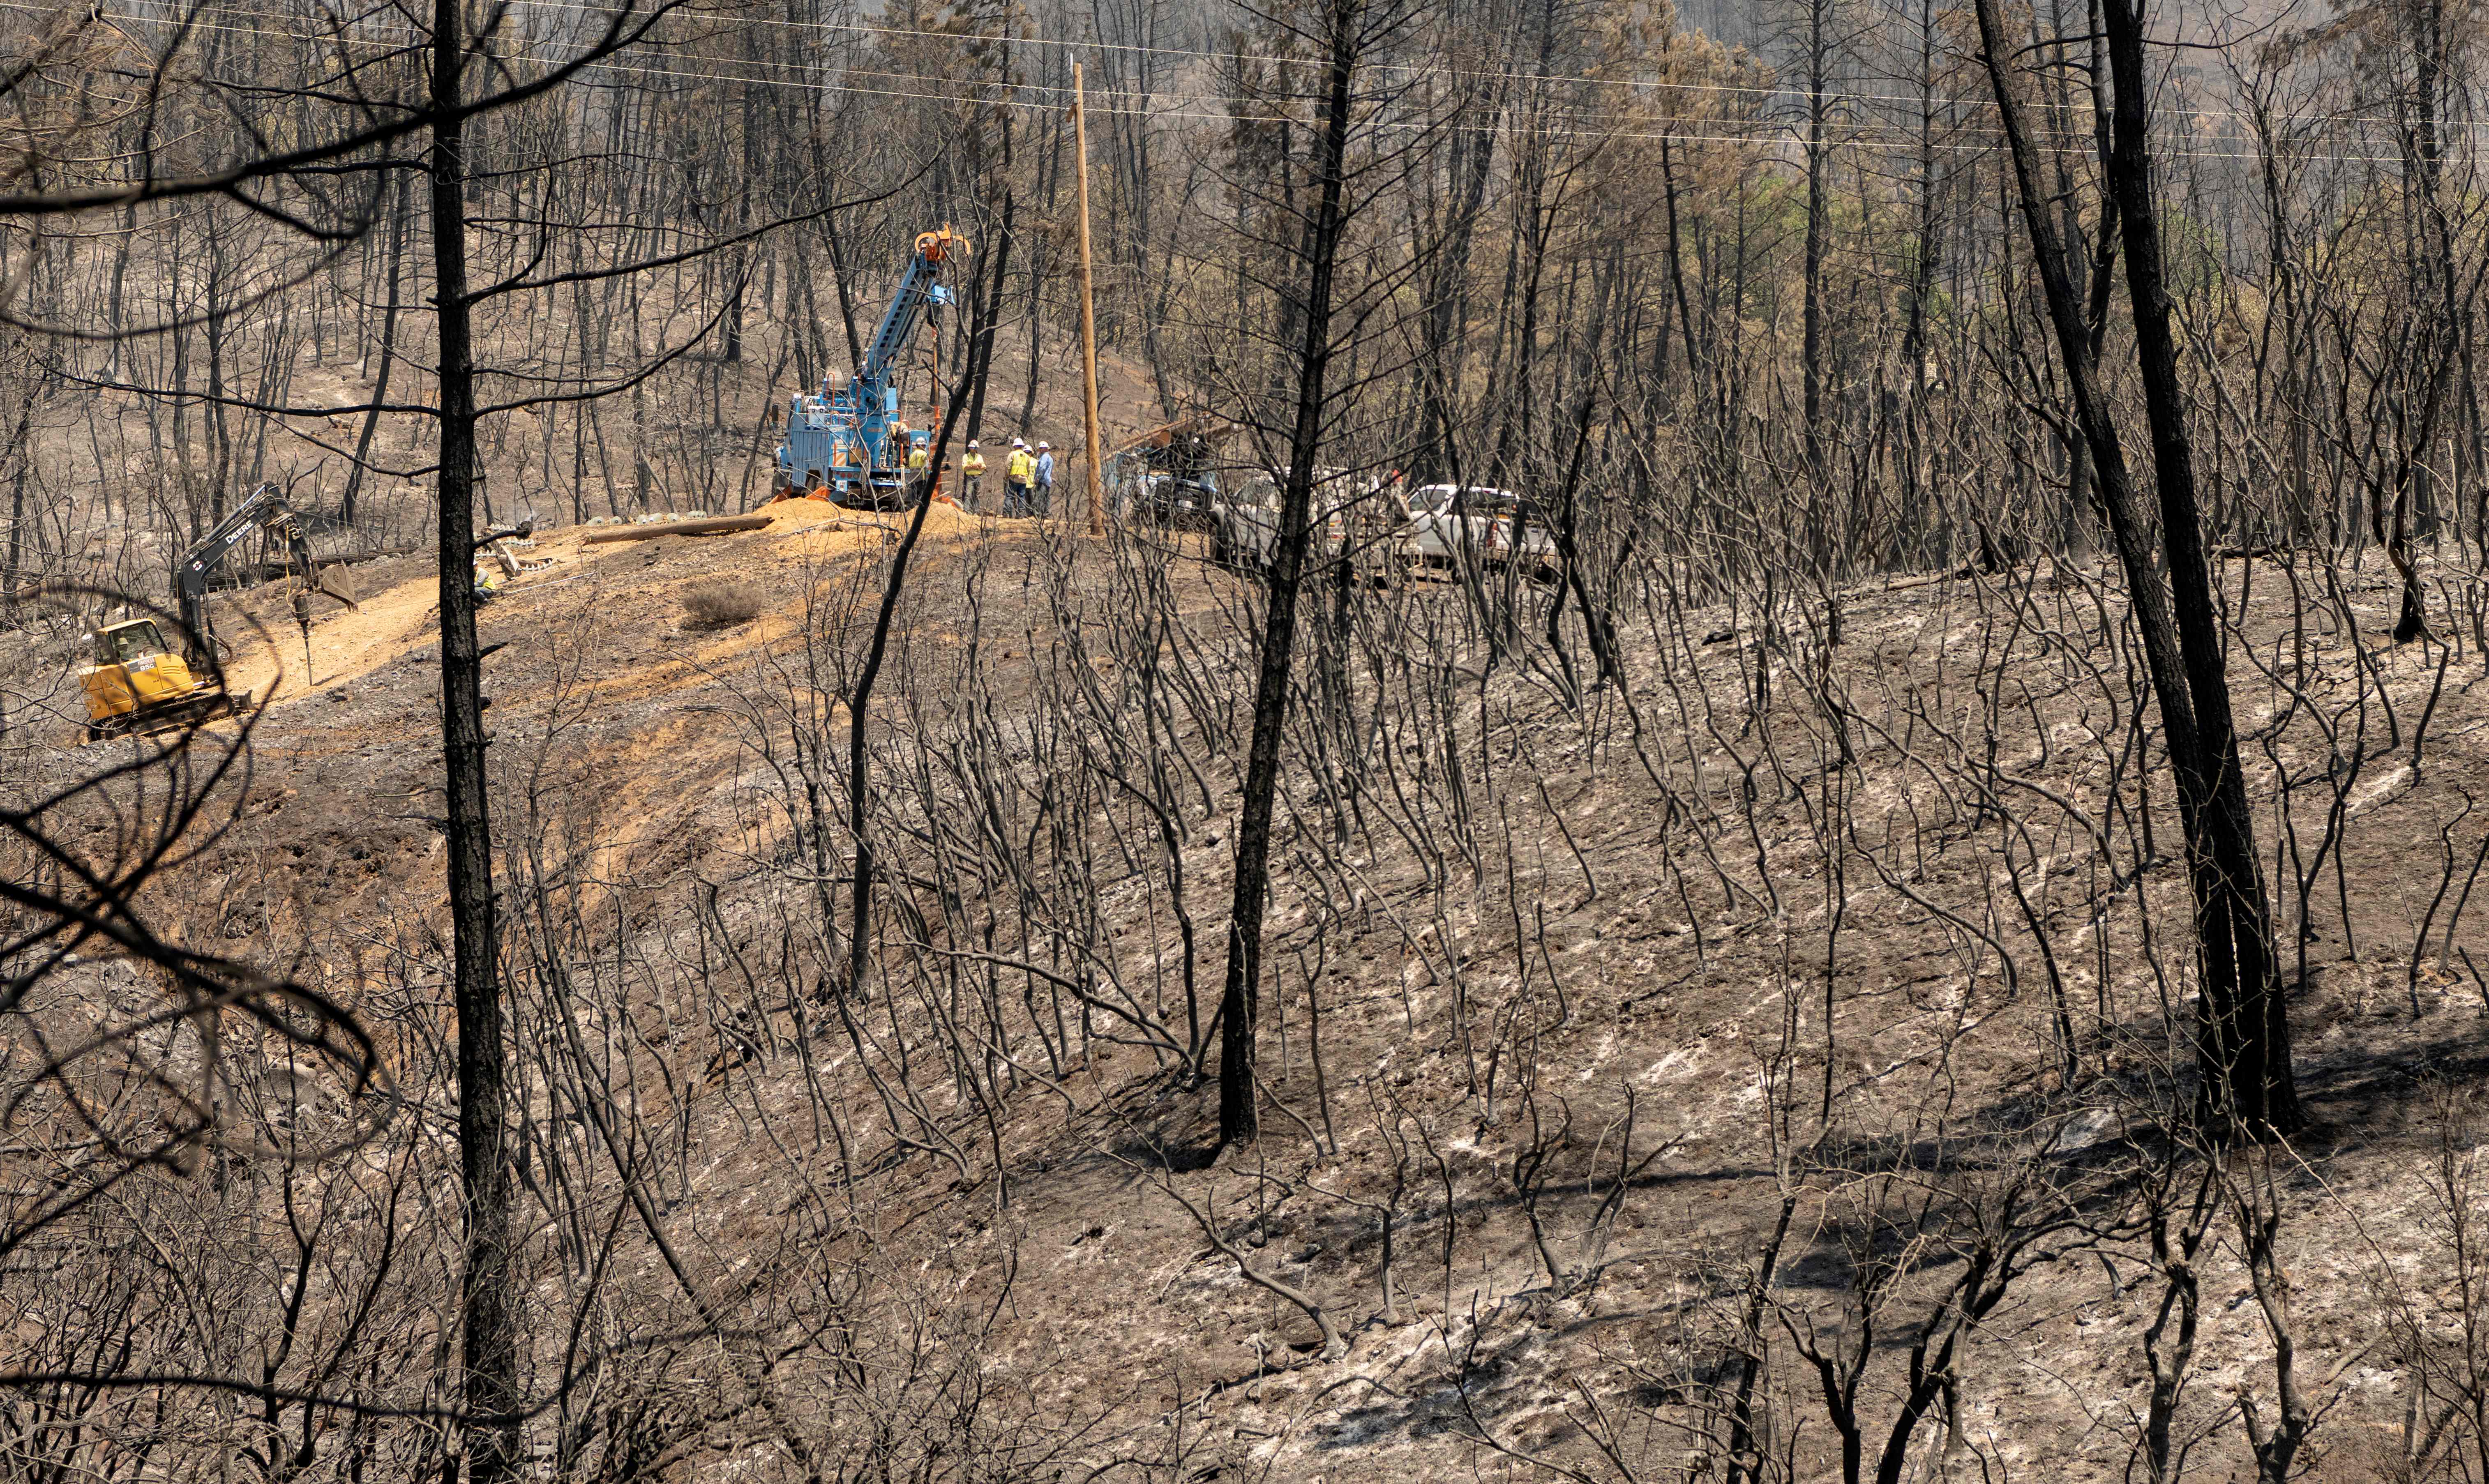 Crews work on a burned hillside during the Salt fire in the Gregory Creek area of Shasta County, California on 2 July 2021